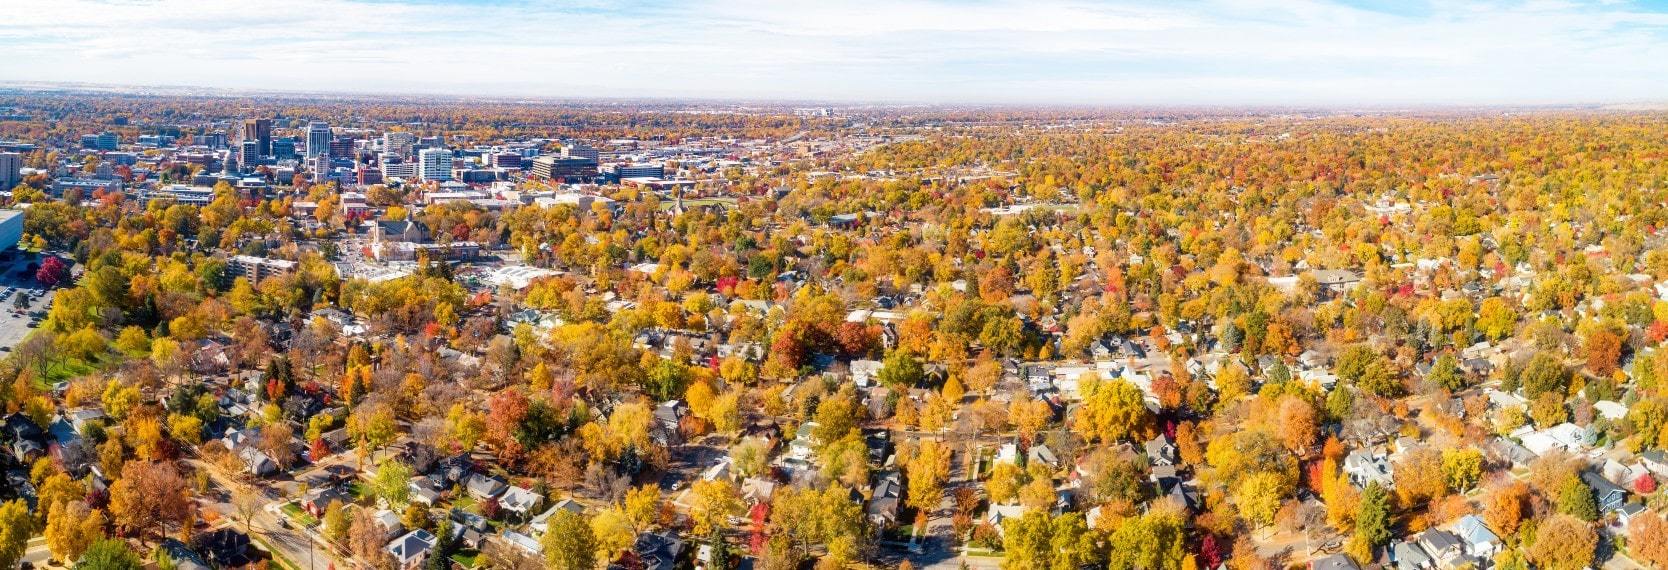 Colorful trees with fall leaves and residential real estate in Boise Idaho